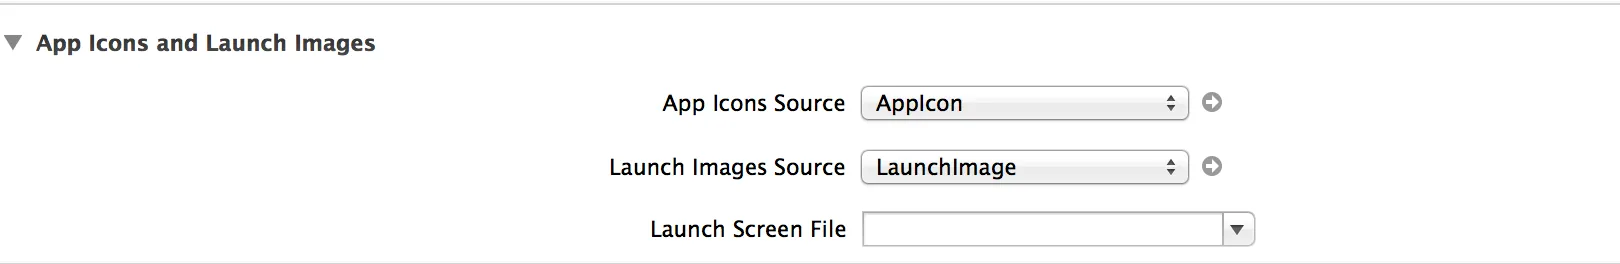 Apps icon and image sets